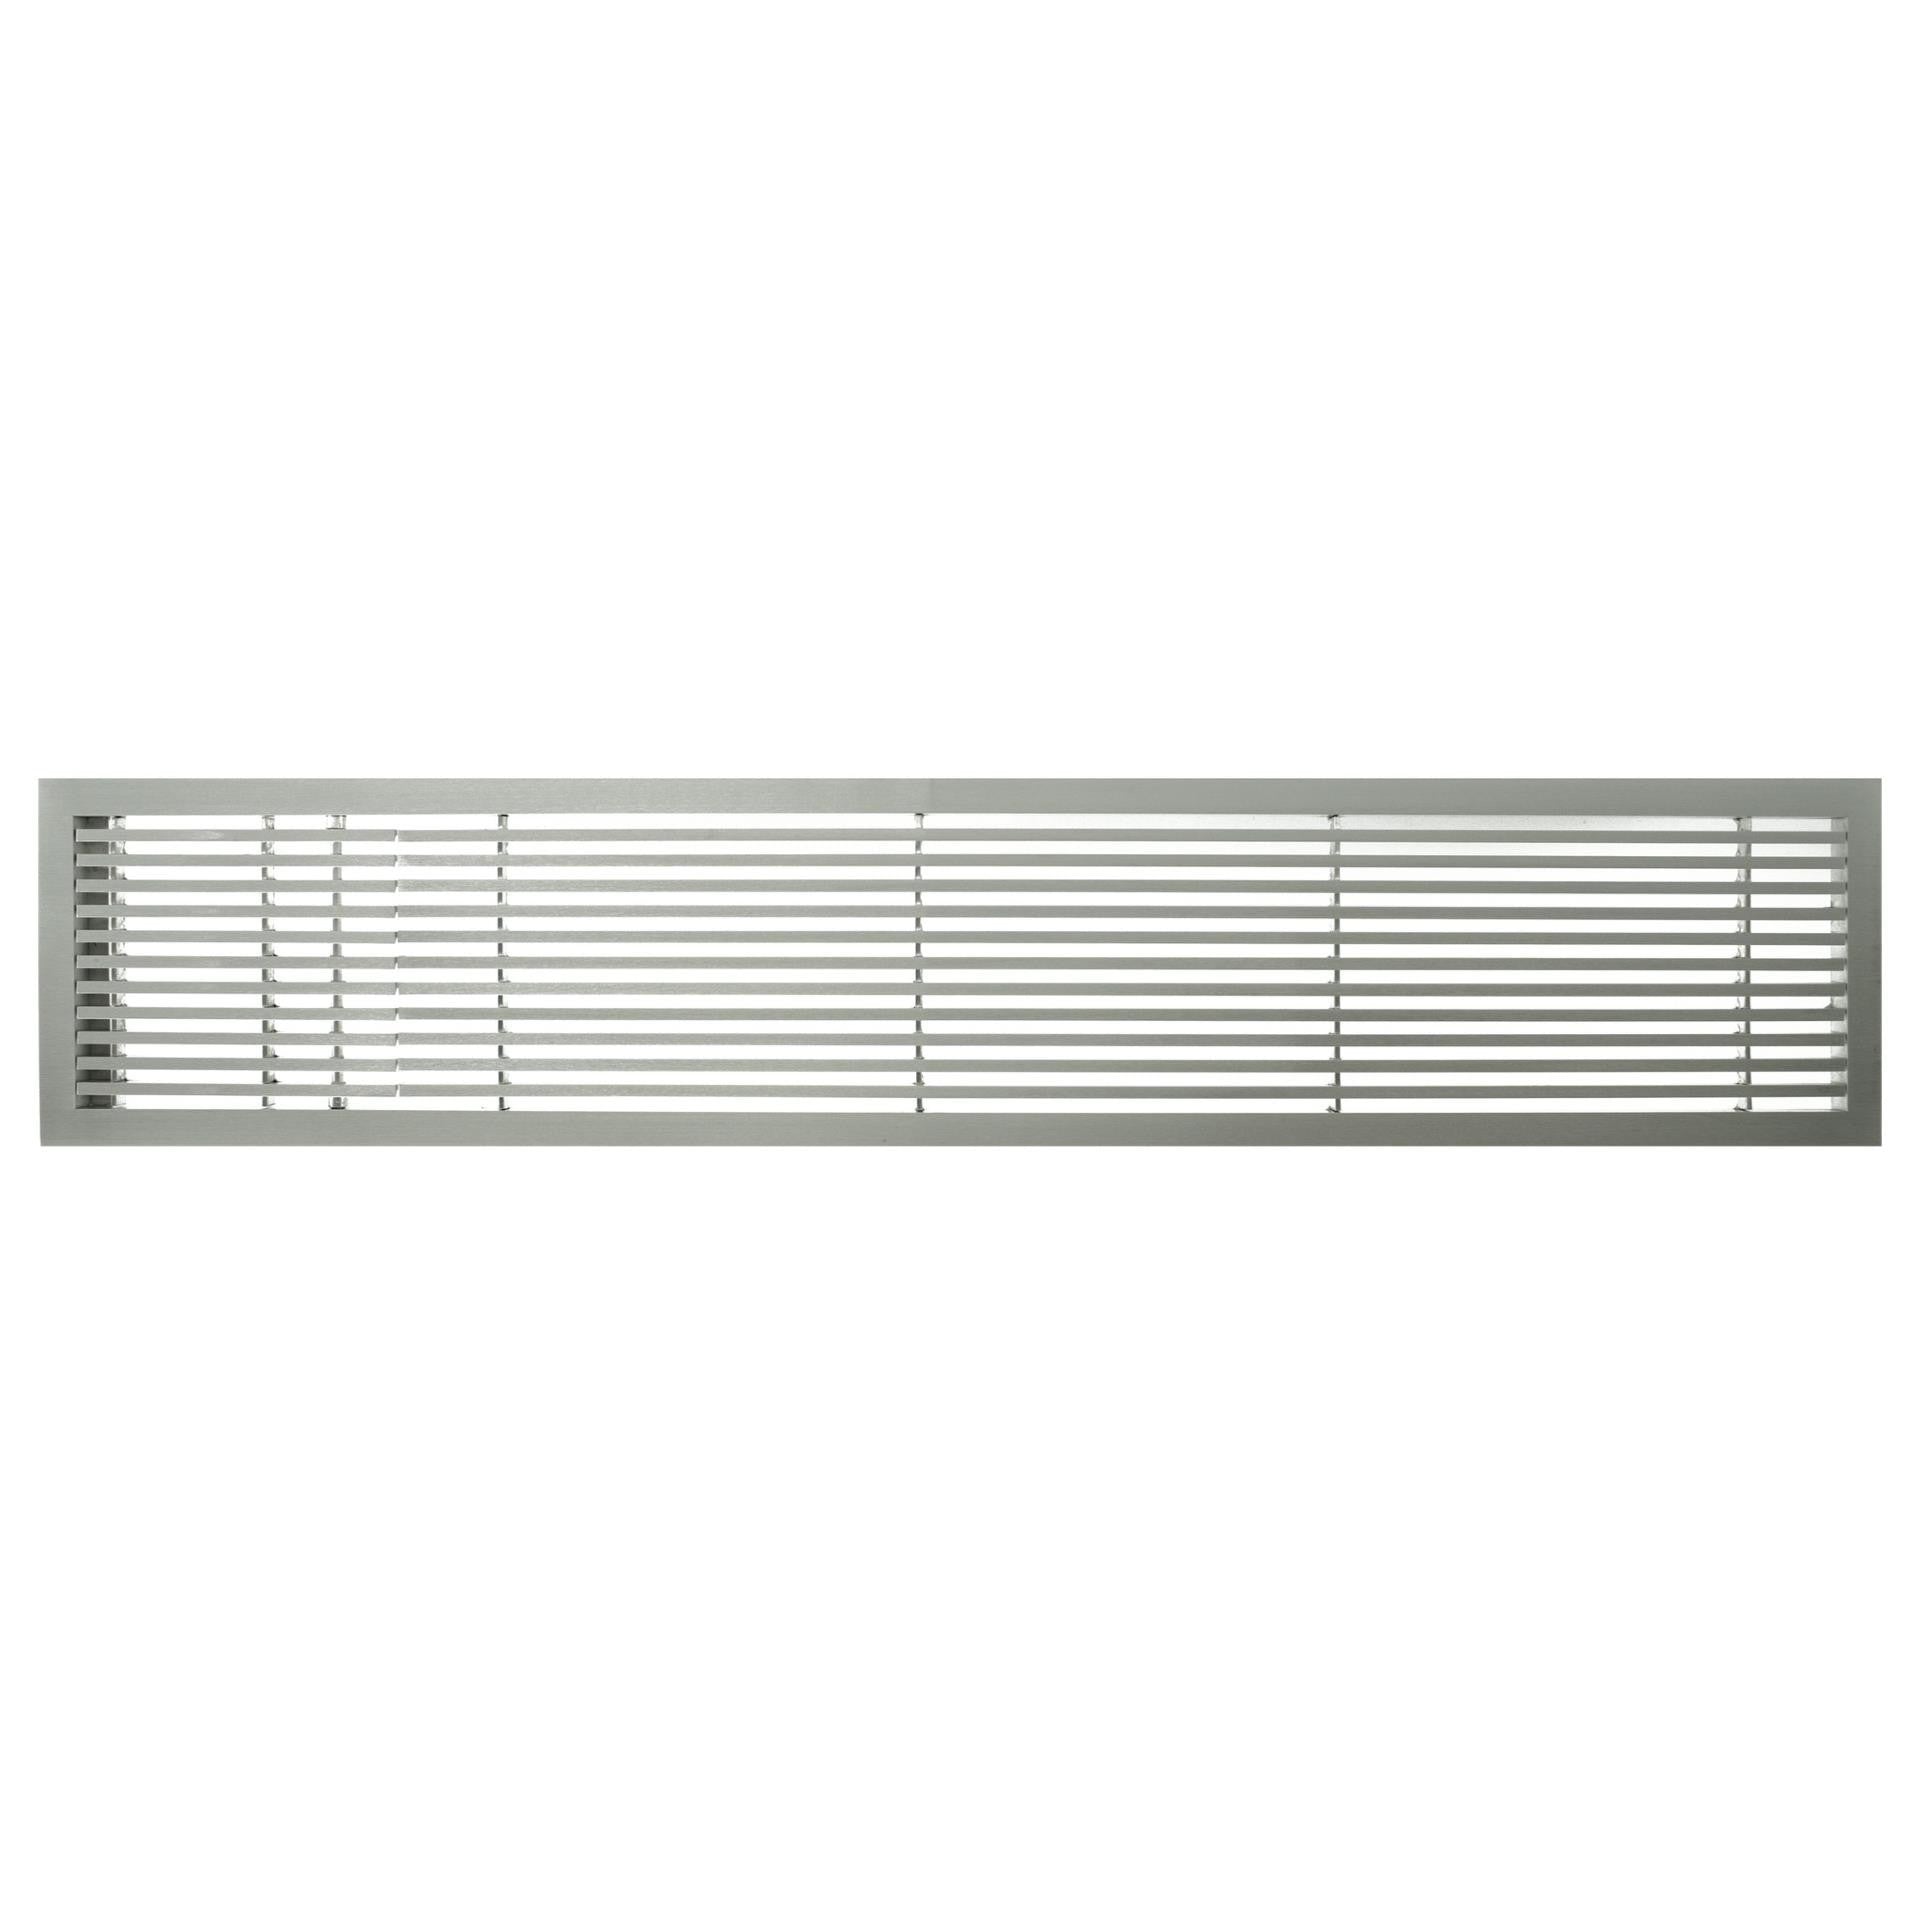 AG20 B Frame Bar Grille with Door